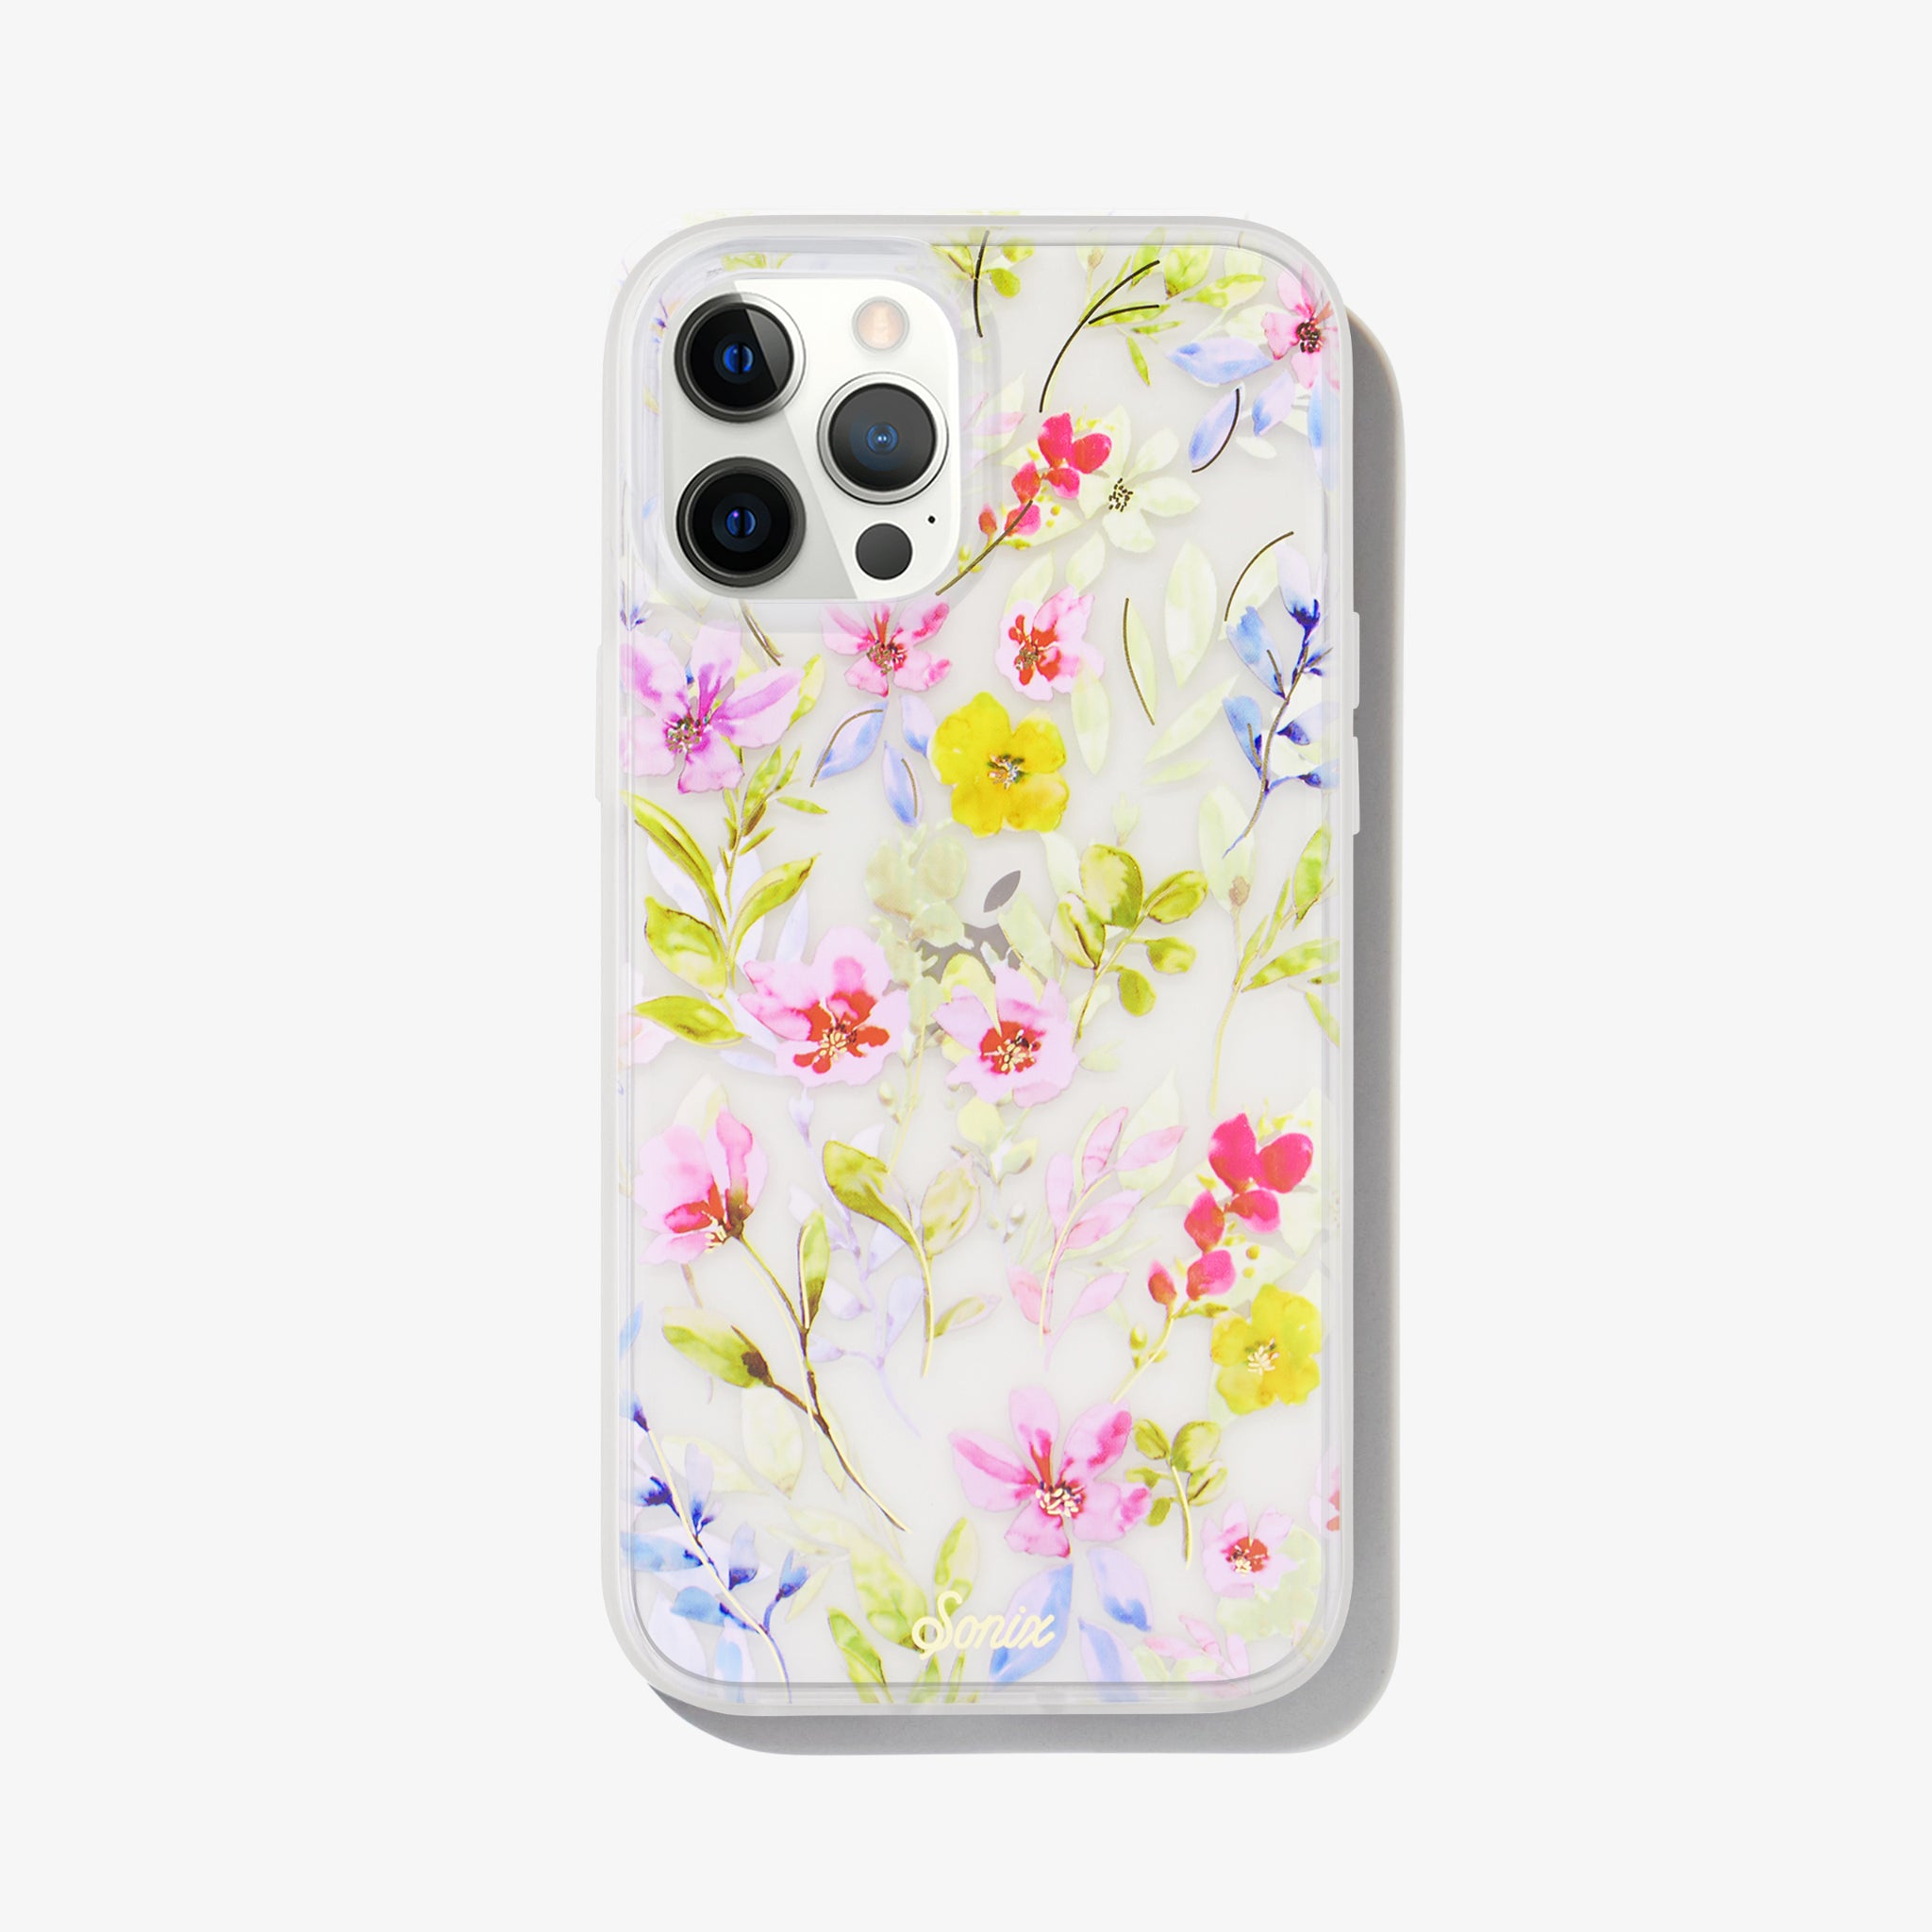 watercolor bouquets printed on a white iPhone 12 pro max iphone with hints of pink, purple, and blue accented with bright greenery. featuring Sonix gold logo at bottom. 